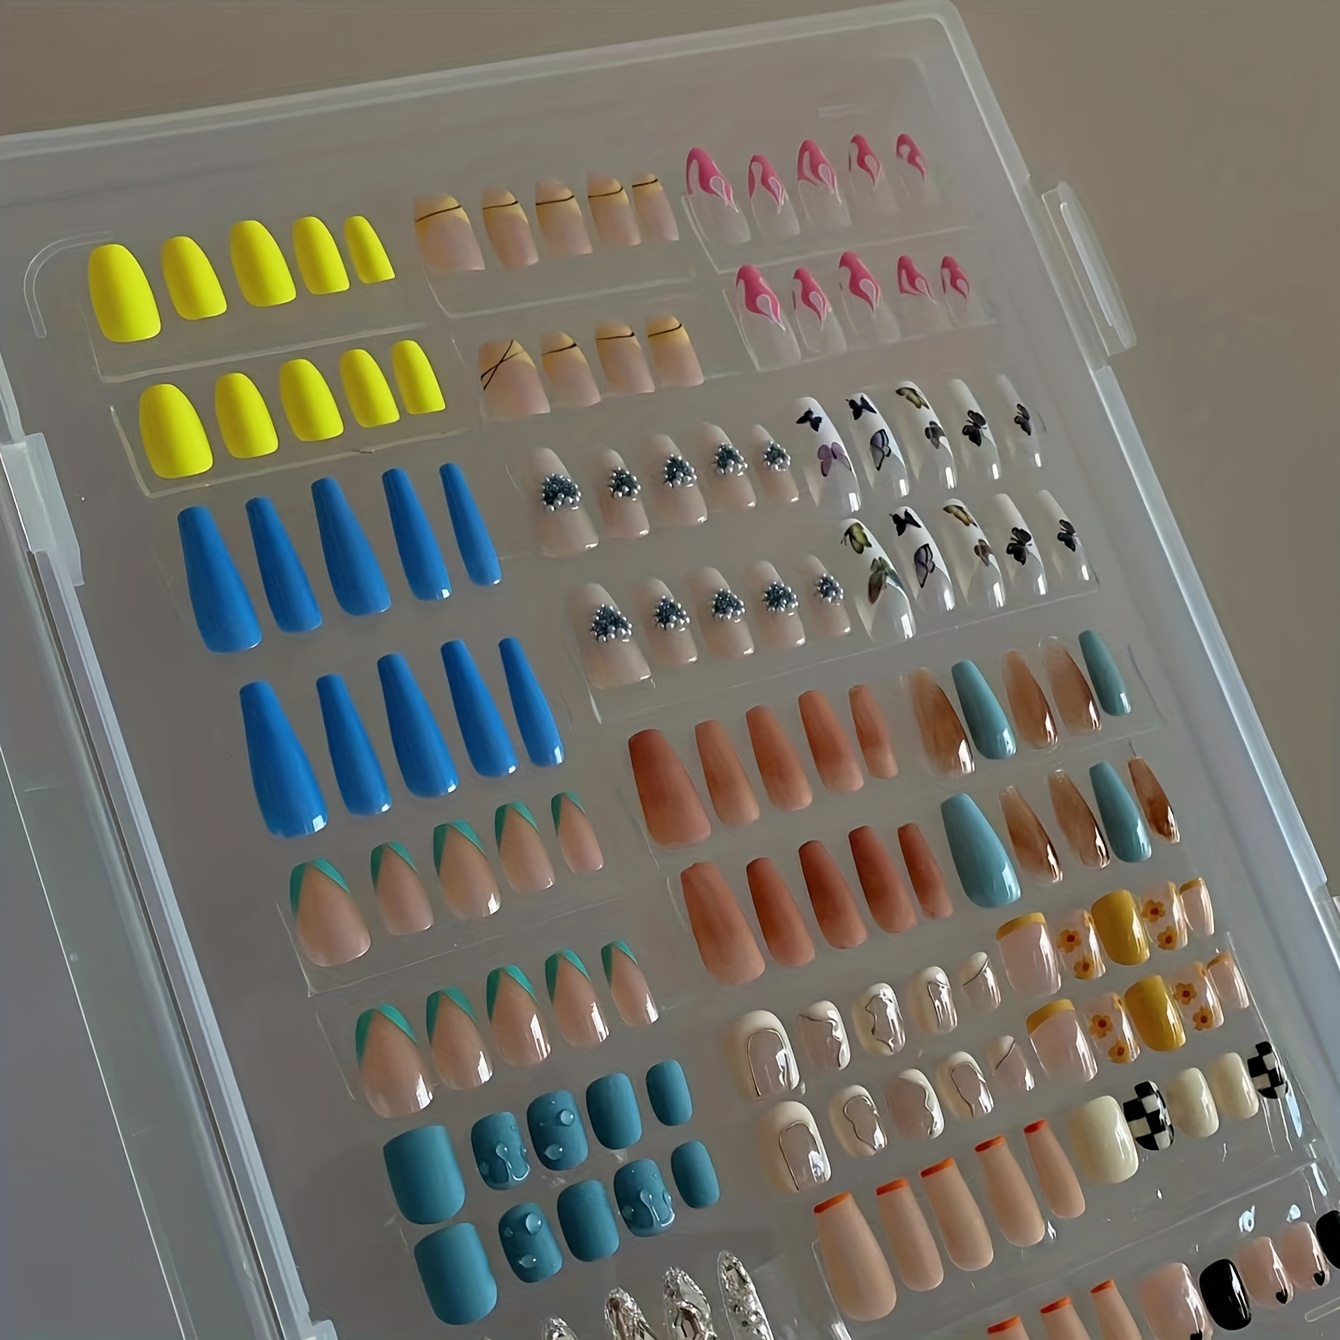 Press On Nail storage idea for all of my Press On Nail enthusiasts. Ta, press on nail